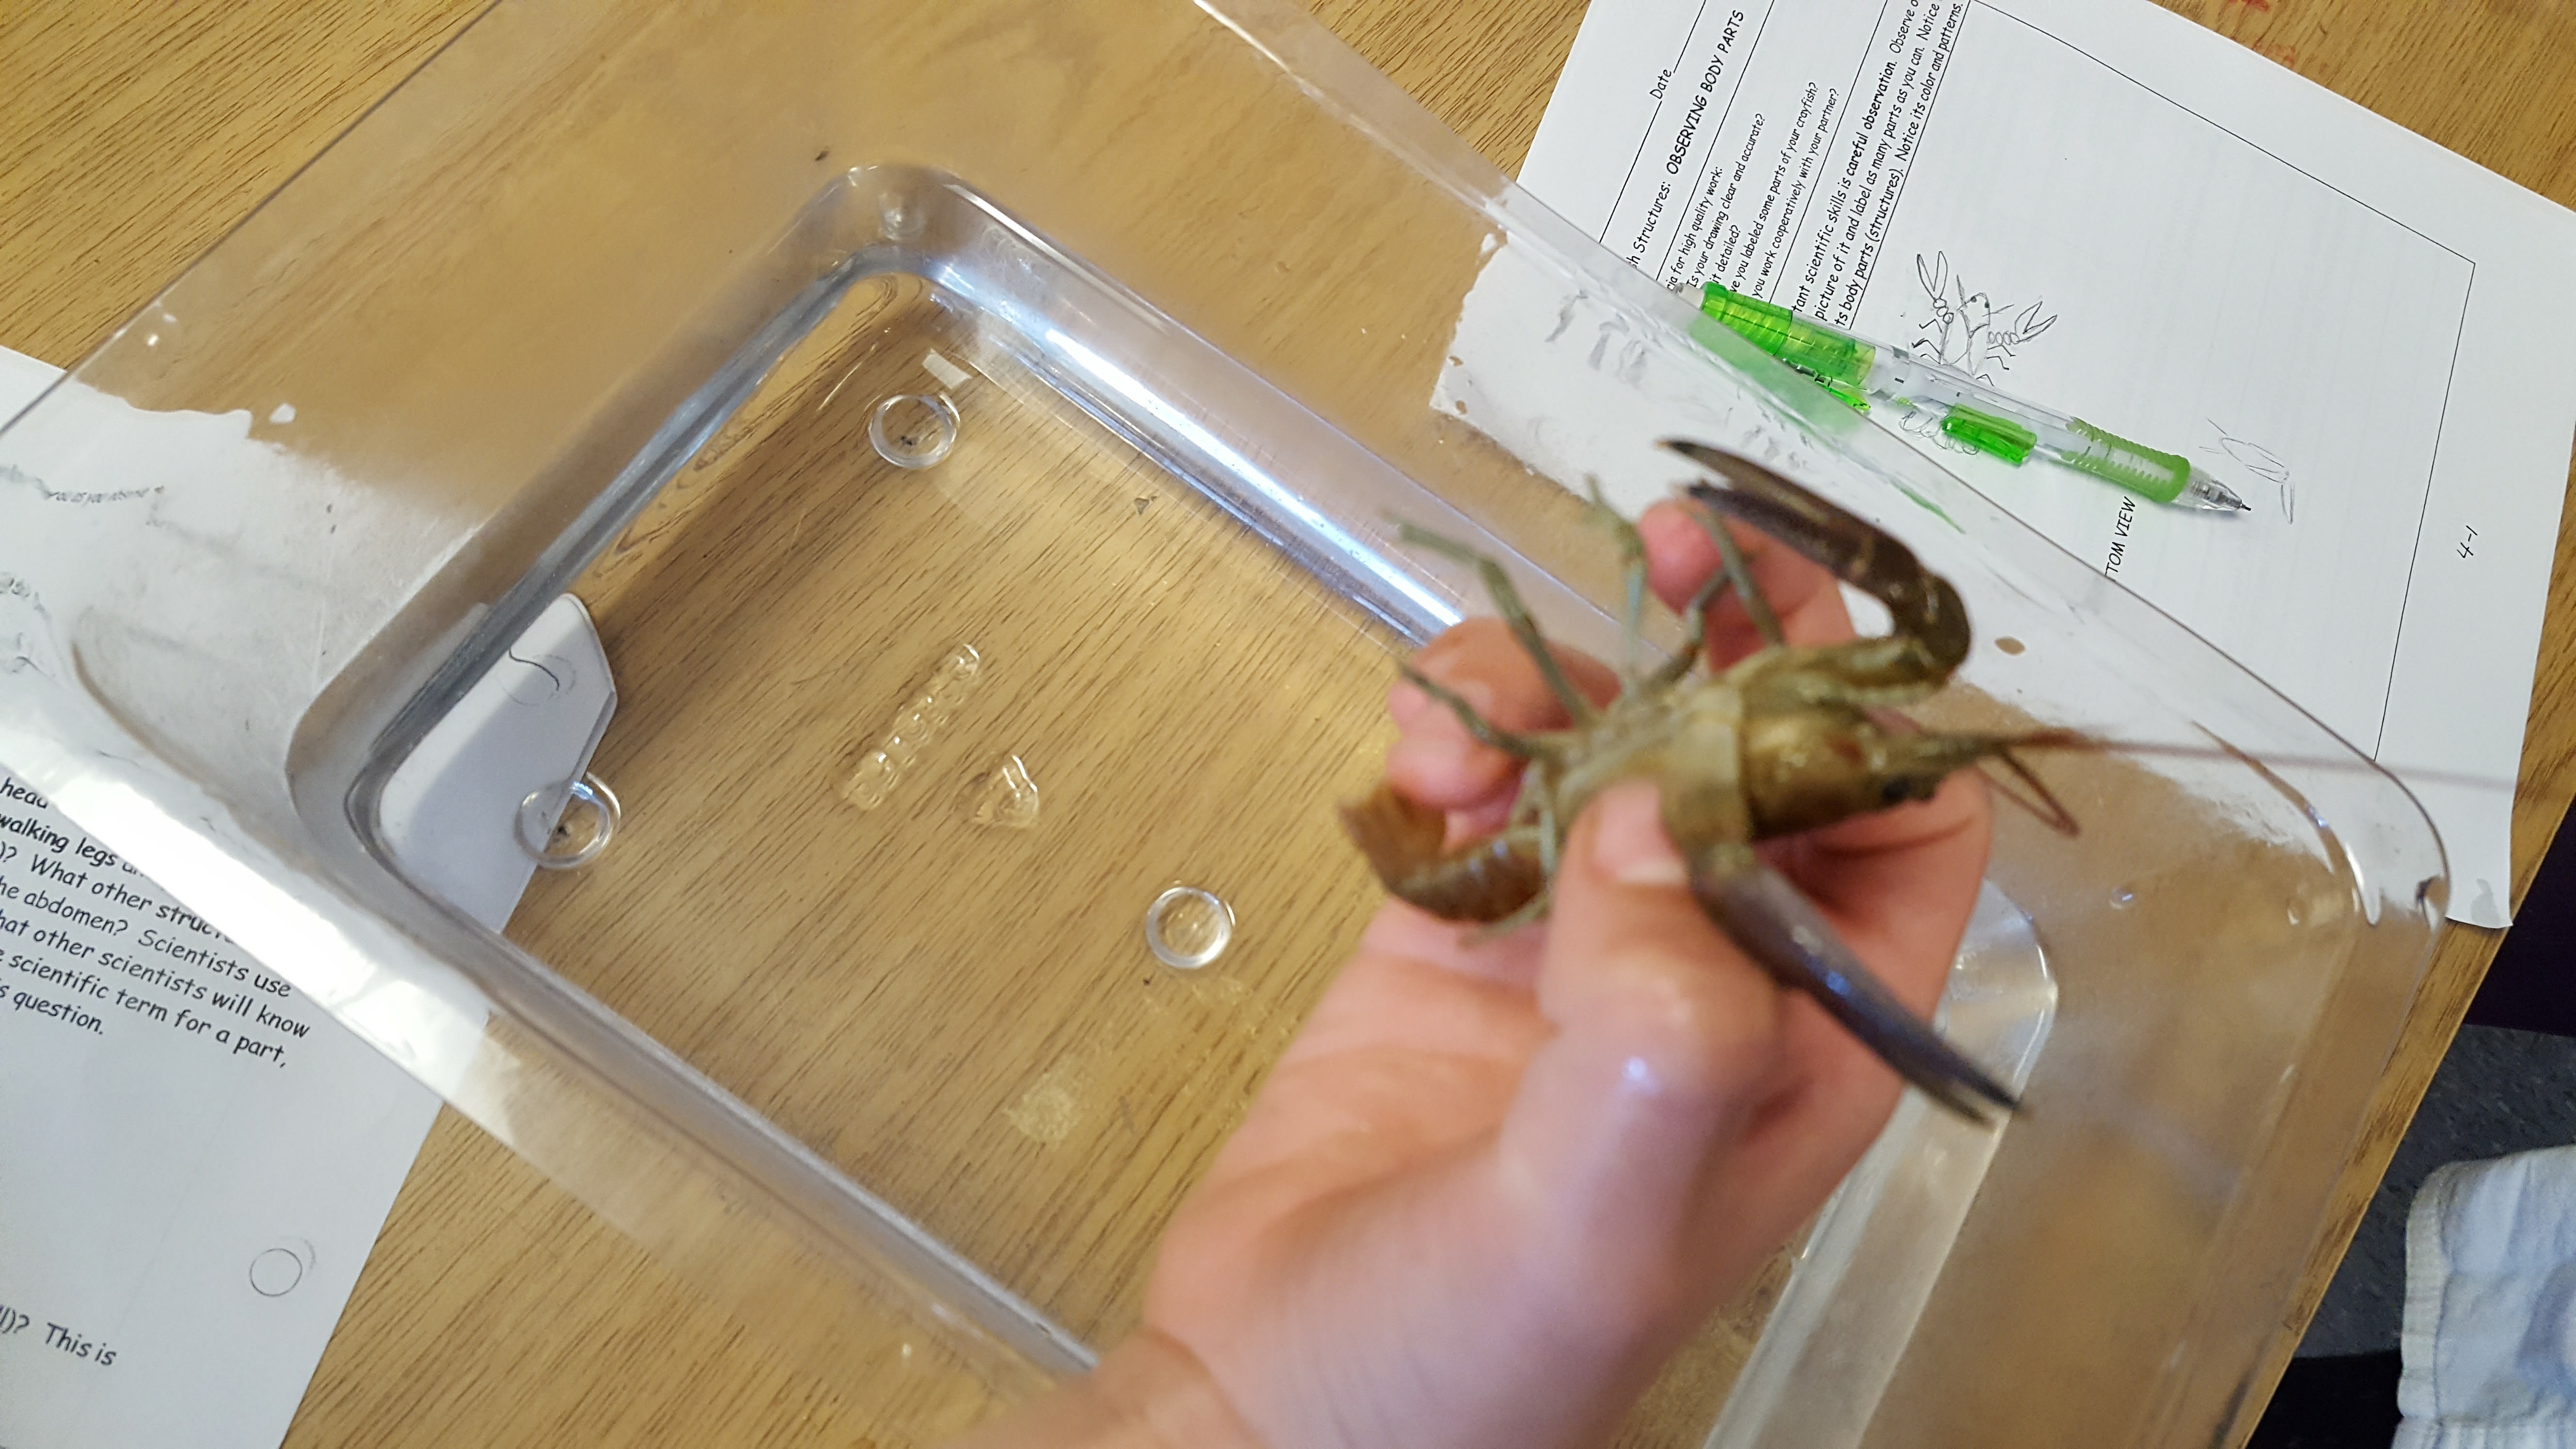 We’re Learning about Crayfish